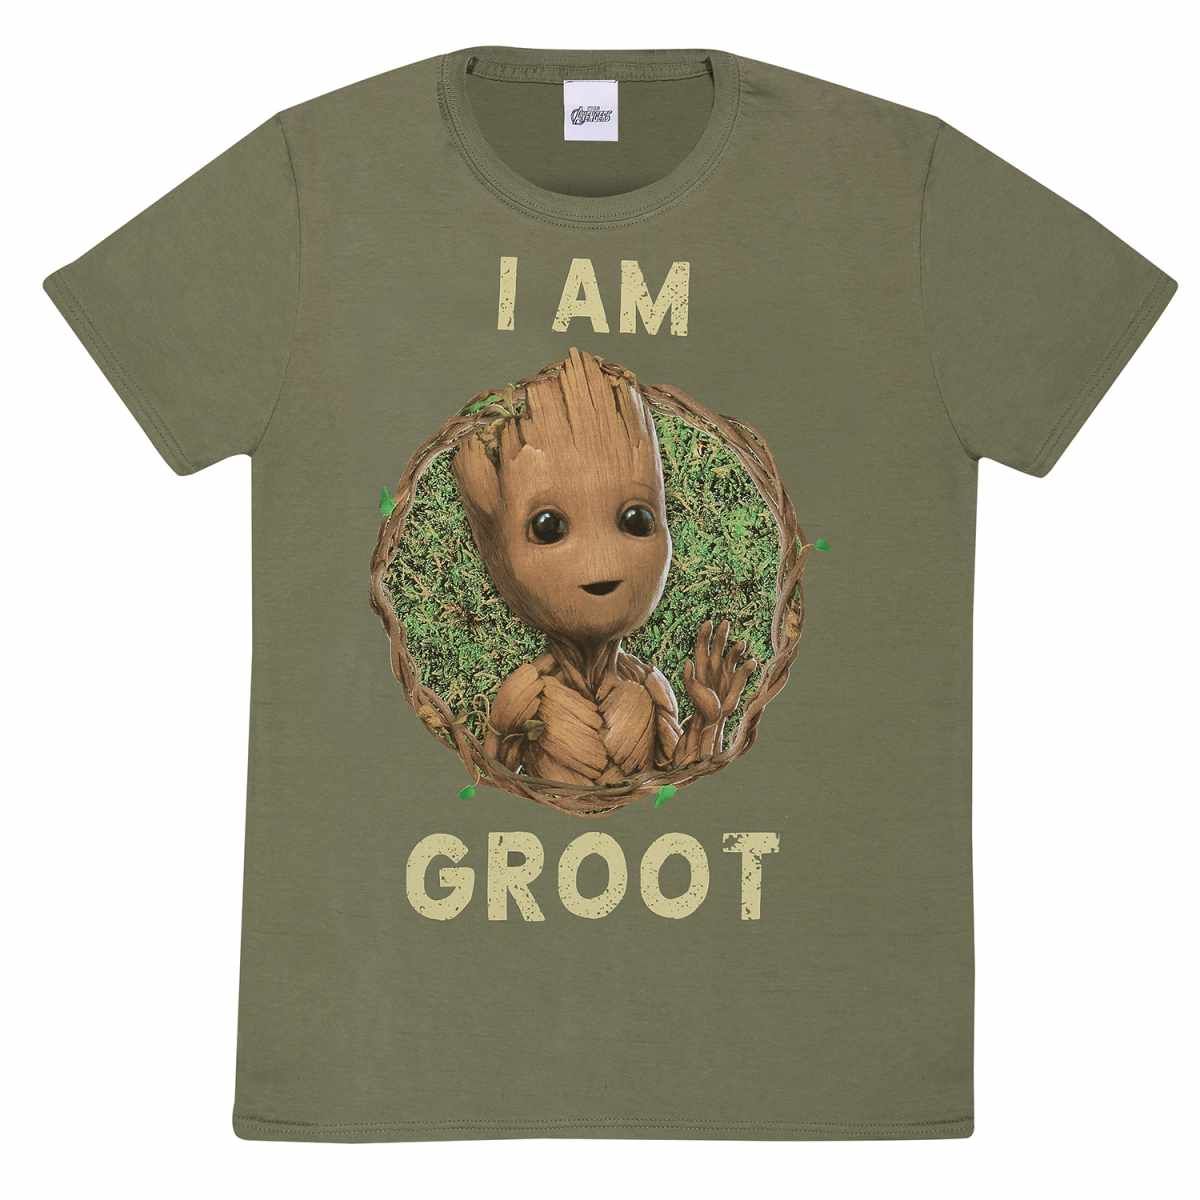 Buy Your Guardians Of The Galaxy I Groot T-Shirt (Free Shipping) -